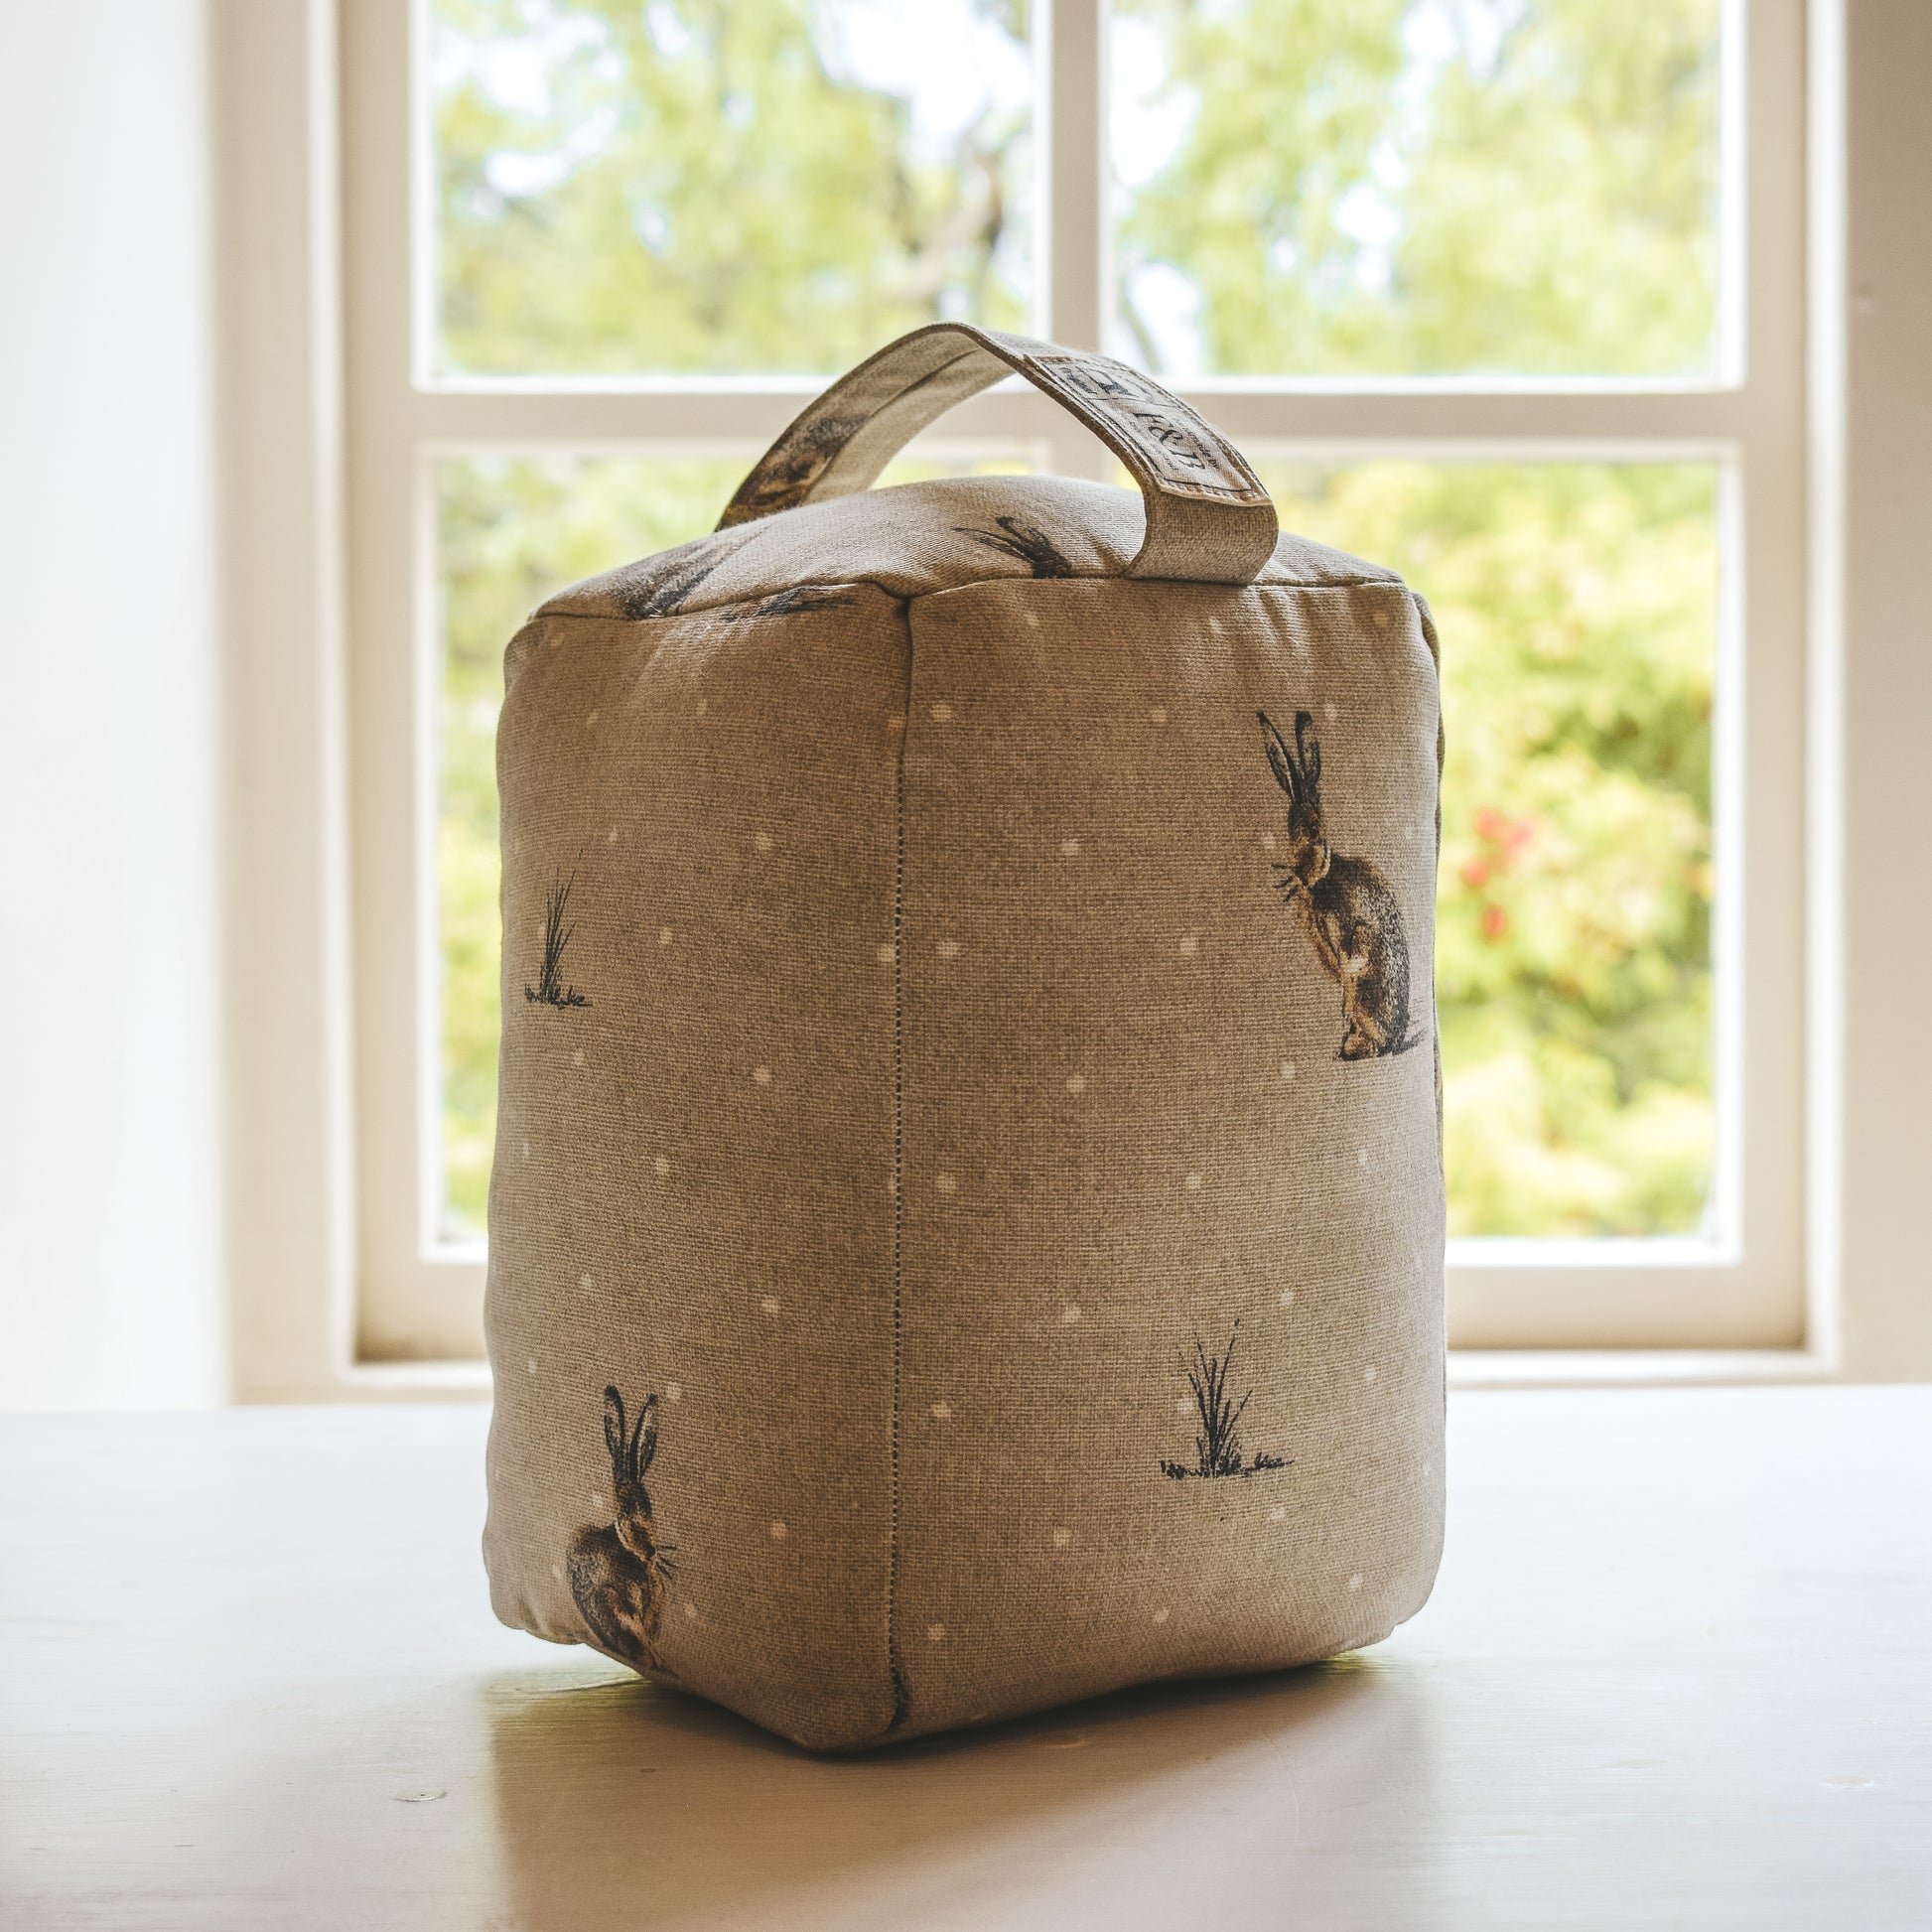 F&B International Country Home Decor Handmade in the UK - Hare and Dot Print Doorstop - Country living - homes essentials